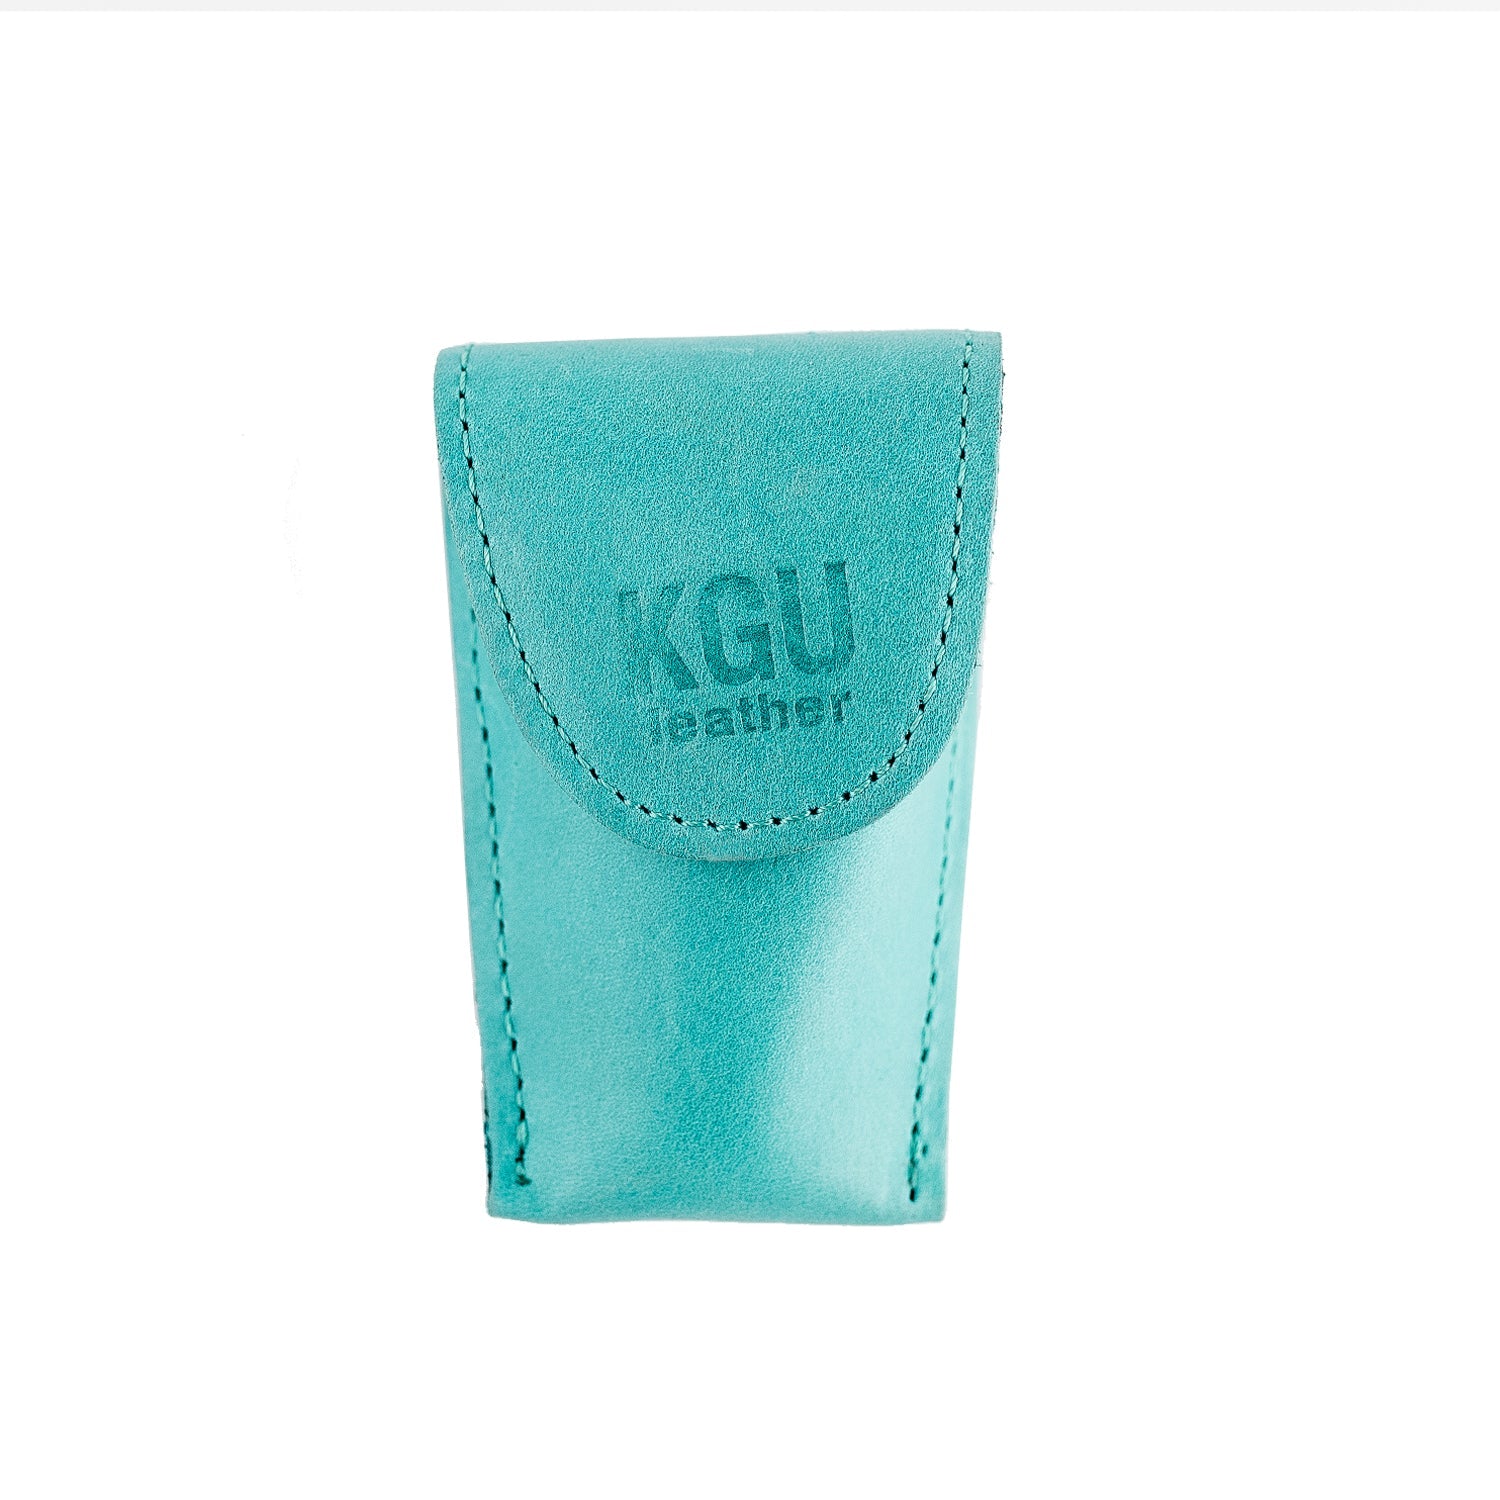 Leather Pouch for French Horn Mouthpieces | 3 models | KGUmusic